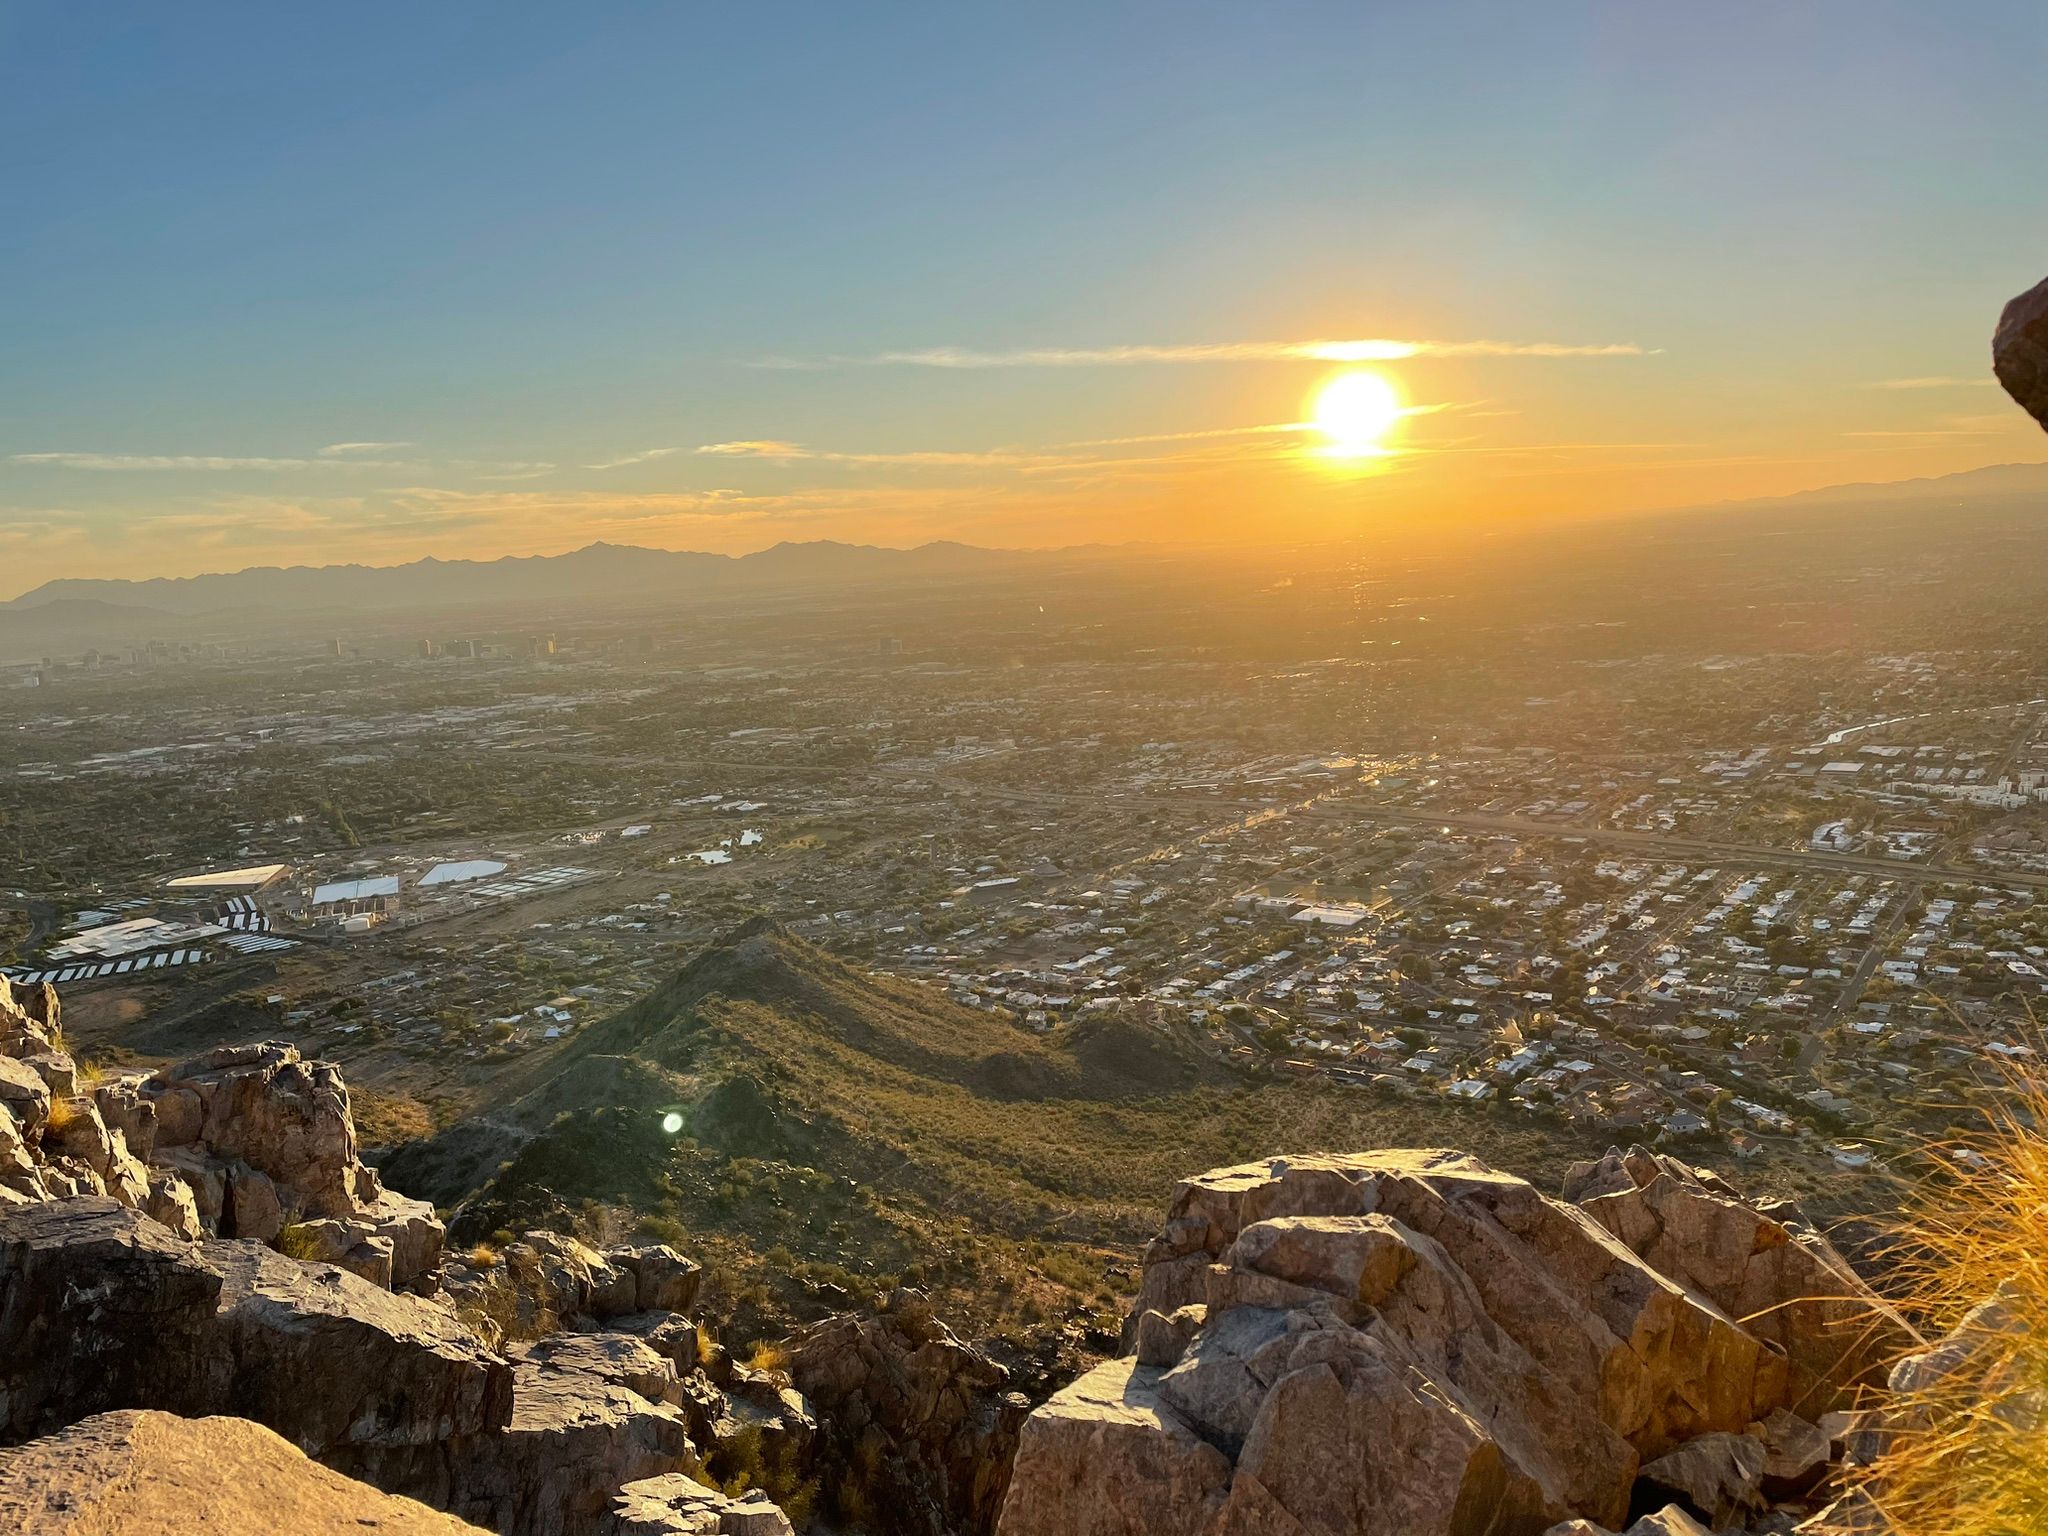 Gorgeous views from Piestewa Peak - one of the harder hiking trails in Scottsdale